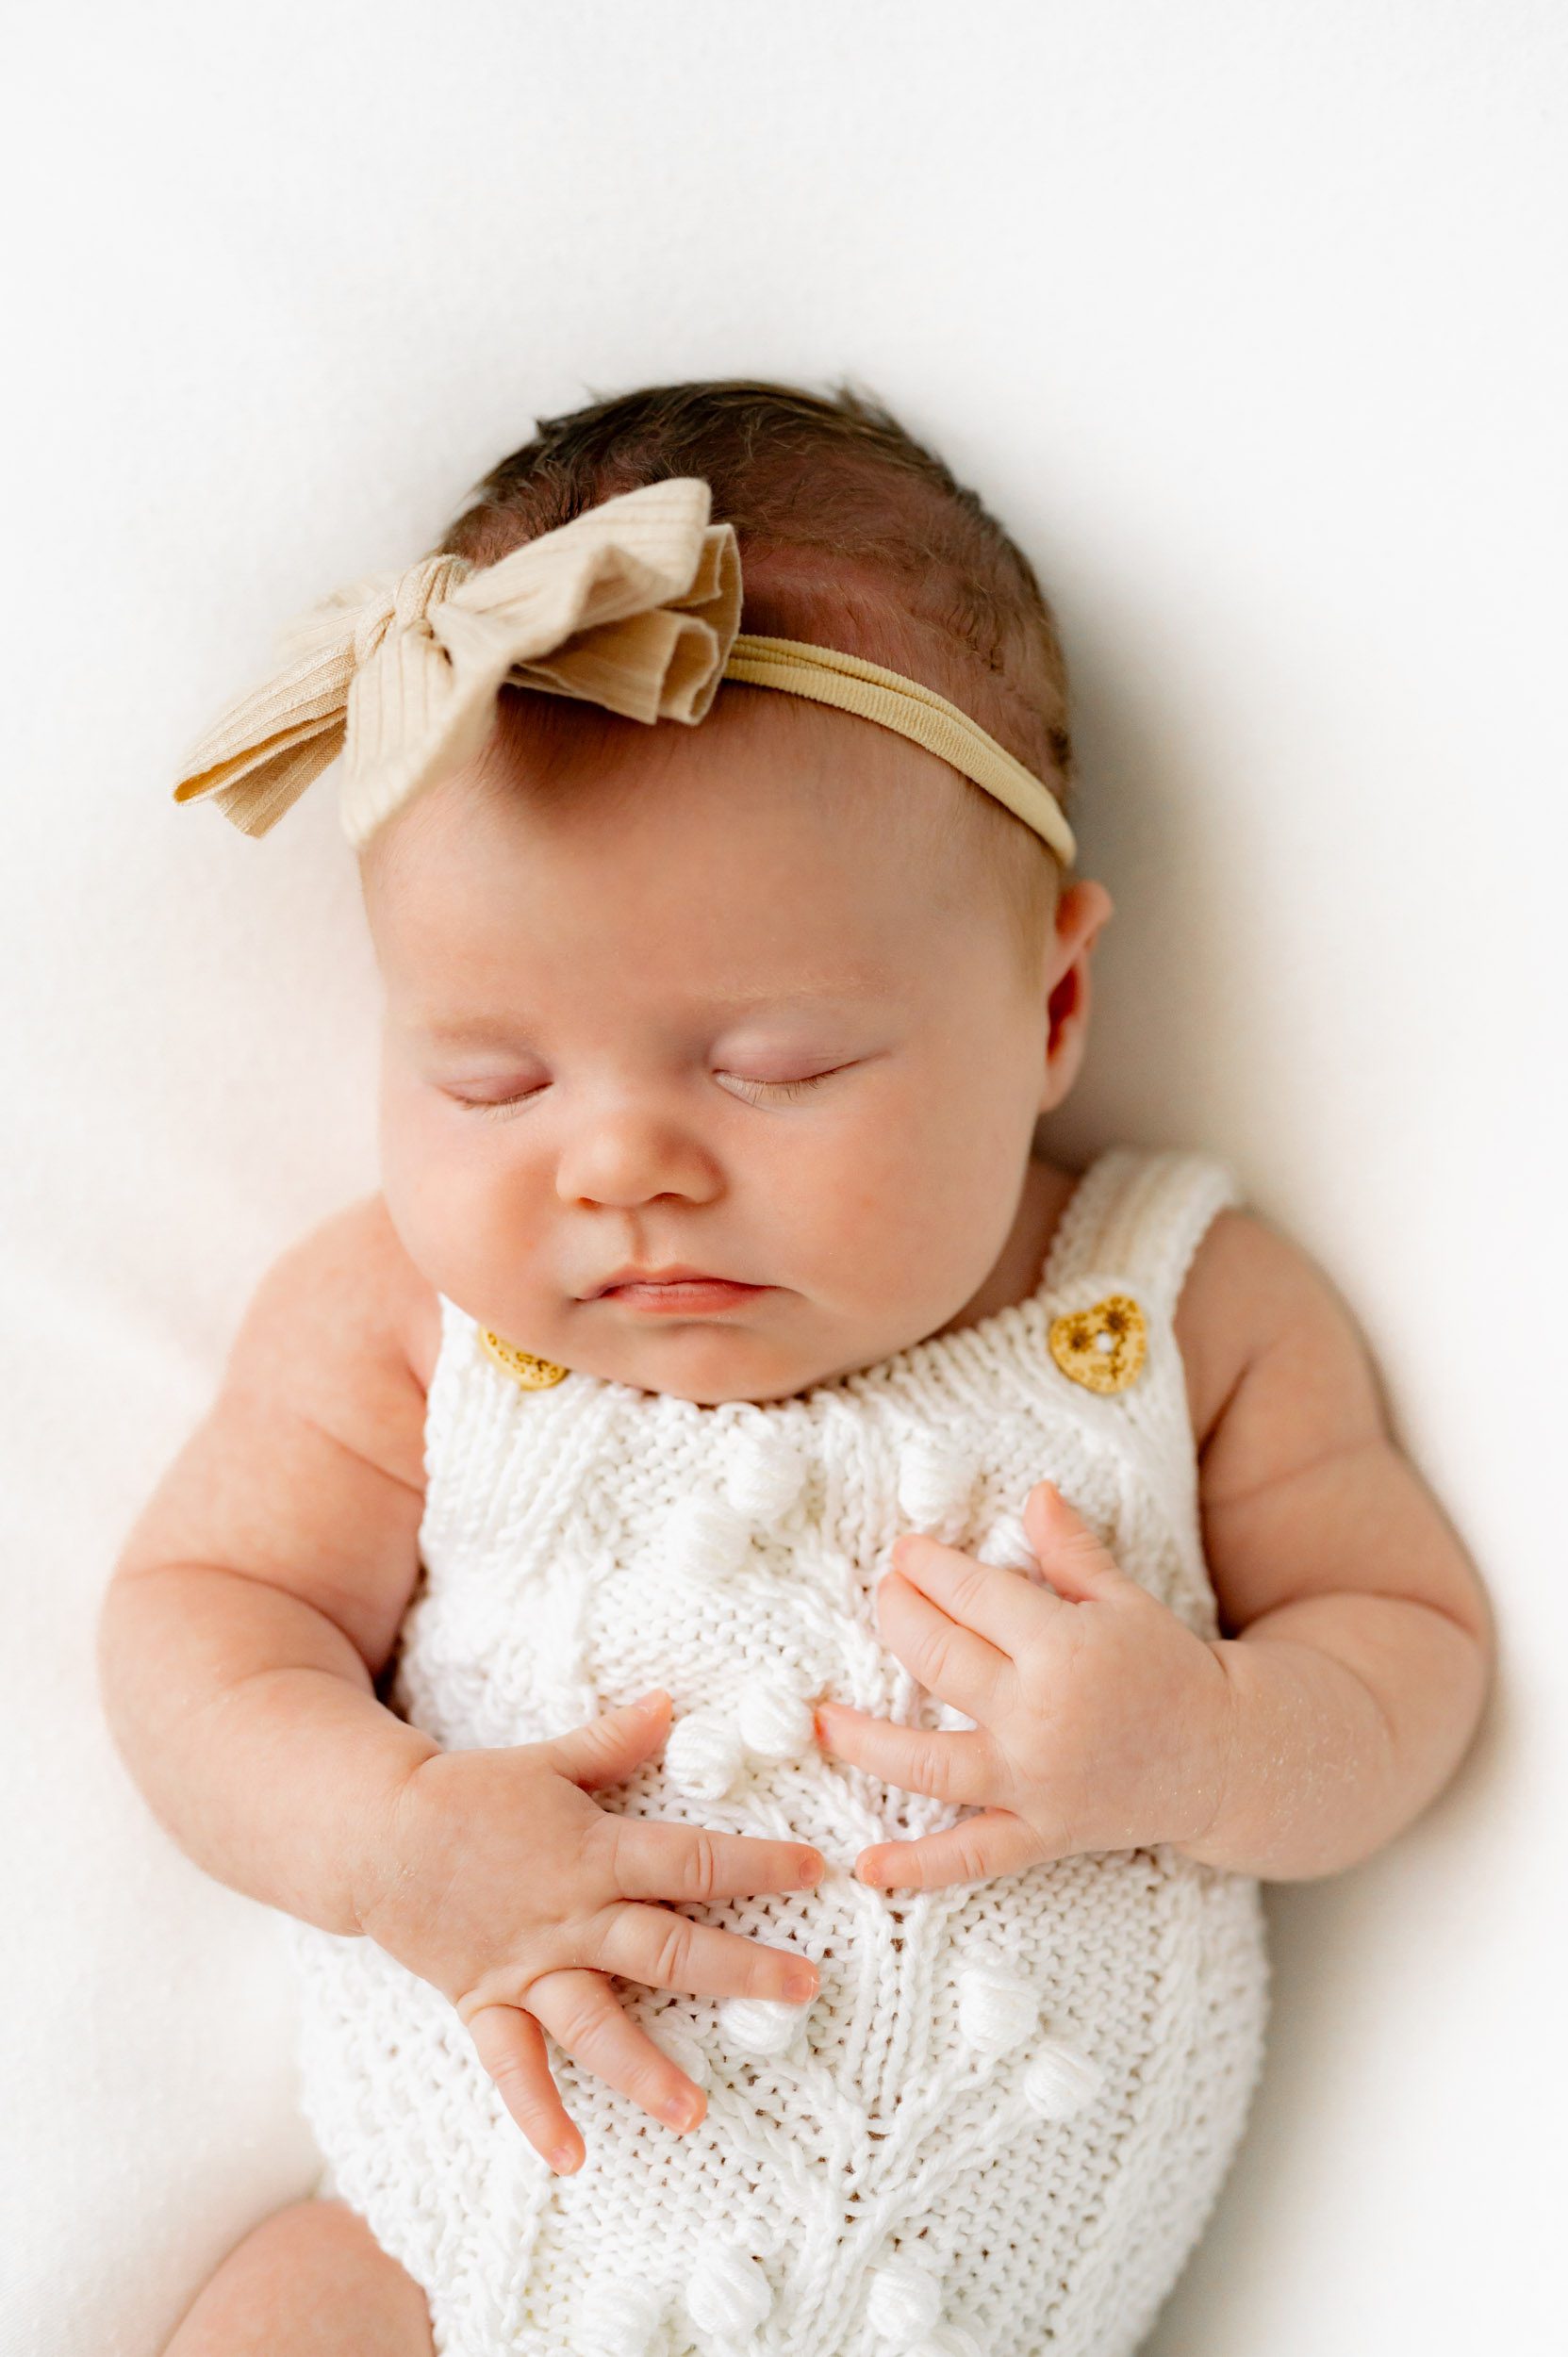 a baby girl wearing a white textured knit romper and beige headband laying on a white backdrop and sleeping peacefully during a newborn photoshoot